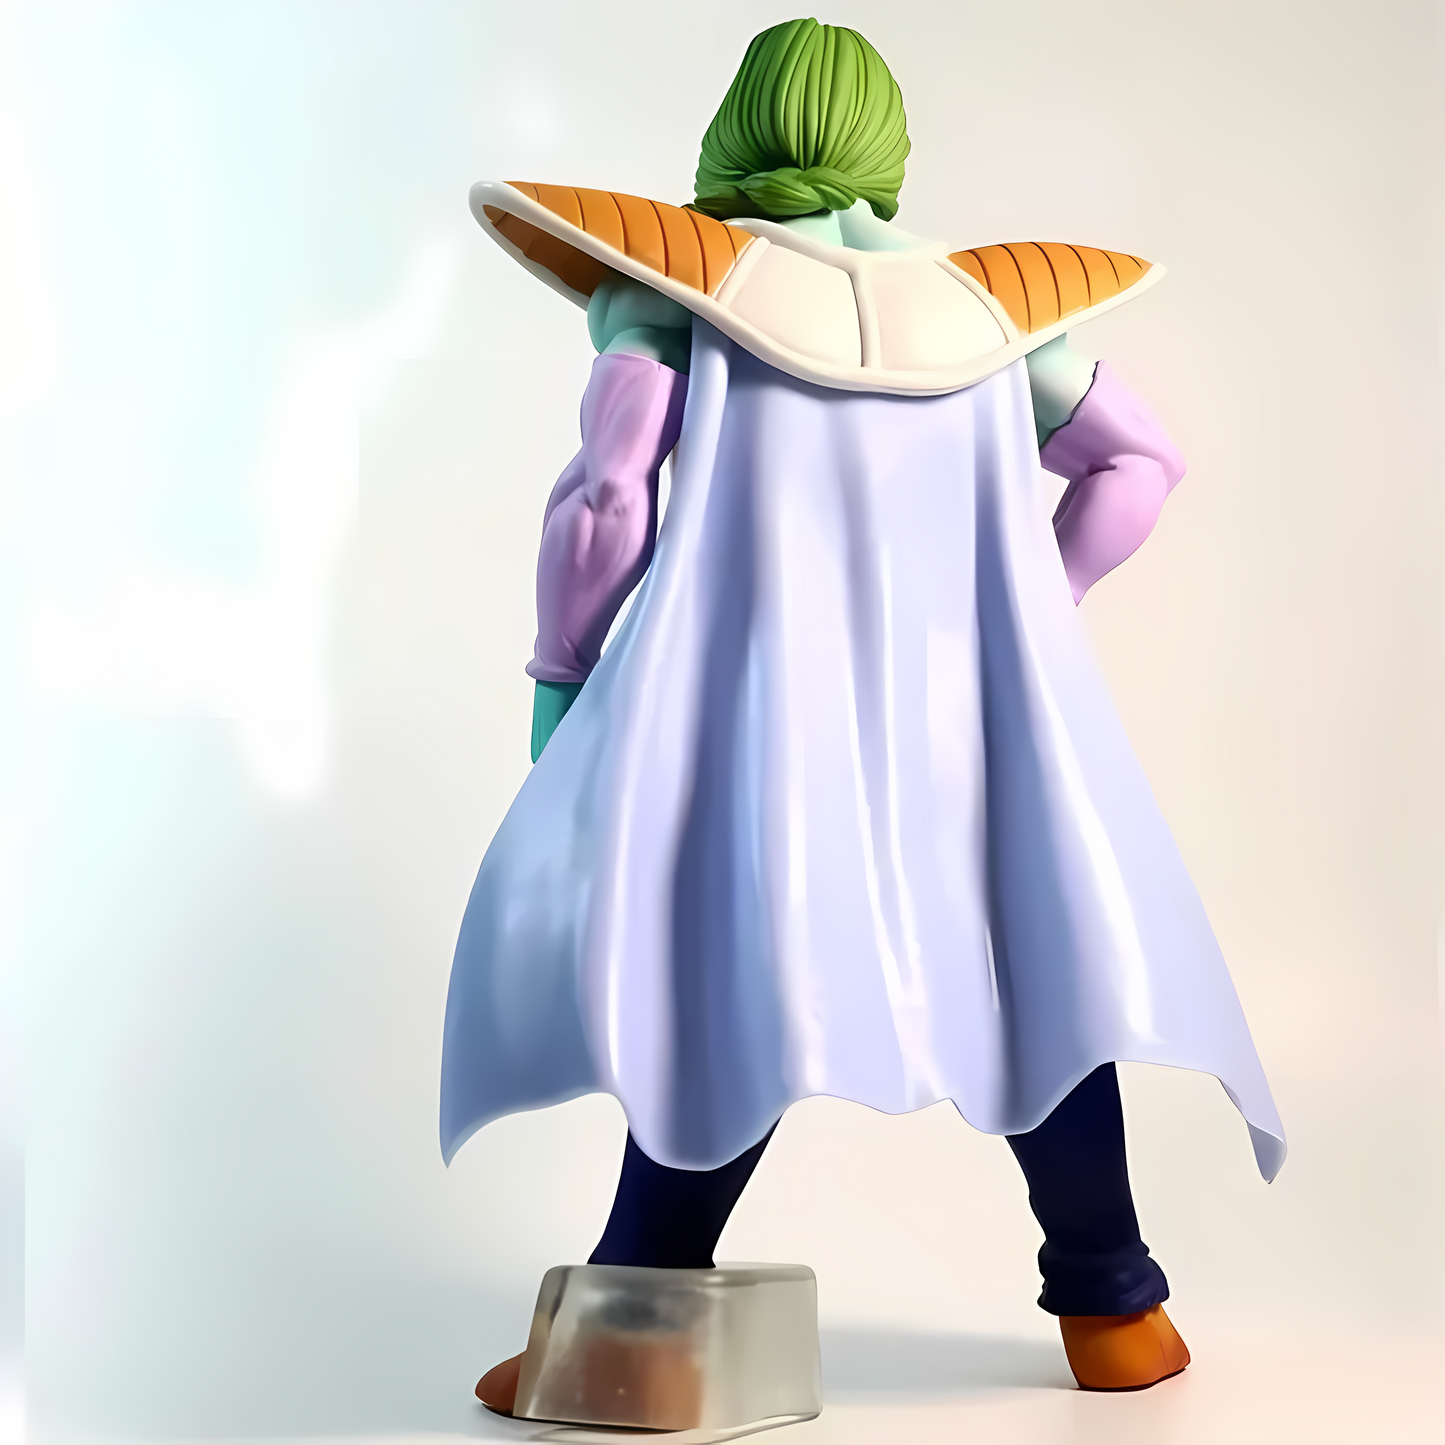 The back view of the Zarbon Dragon Ball collectible figure, featuring the flowing cape and sculpted muscles, emphasizing the craftsmanship of Dragon Ball figures for collectors.